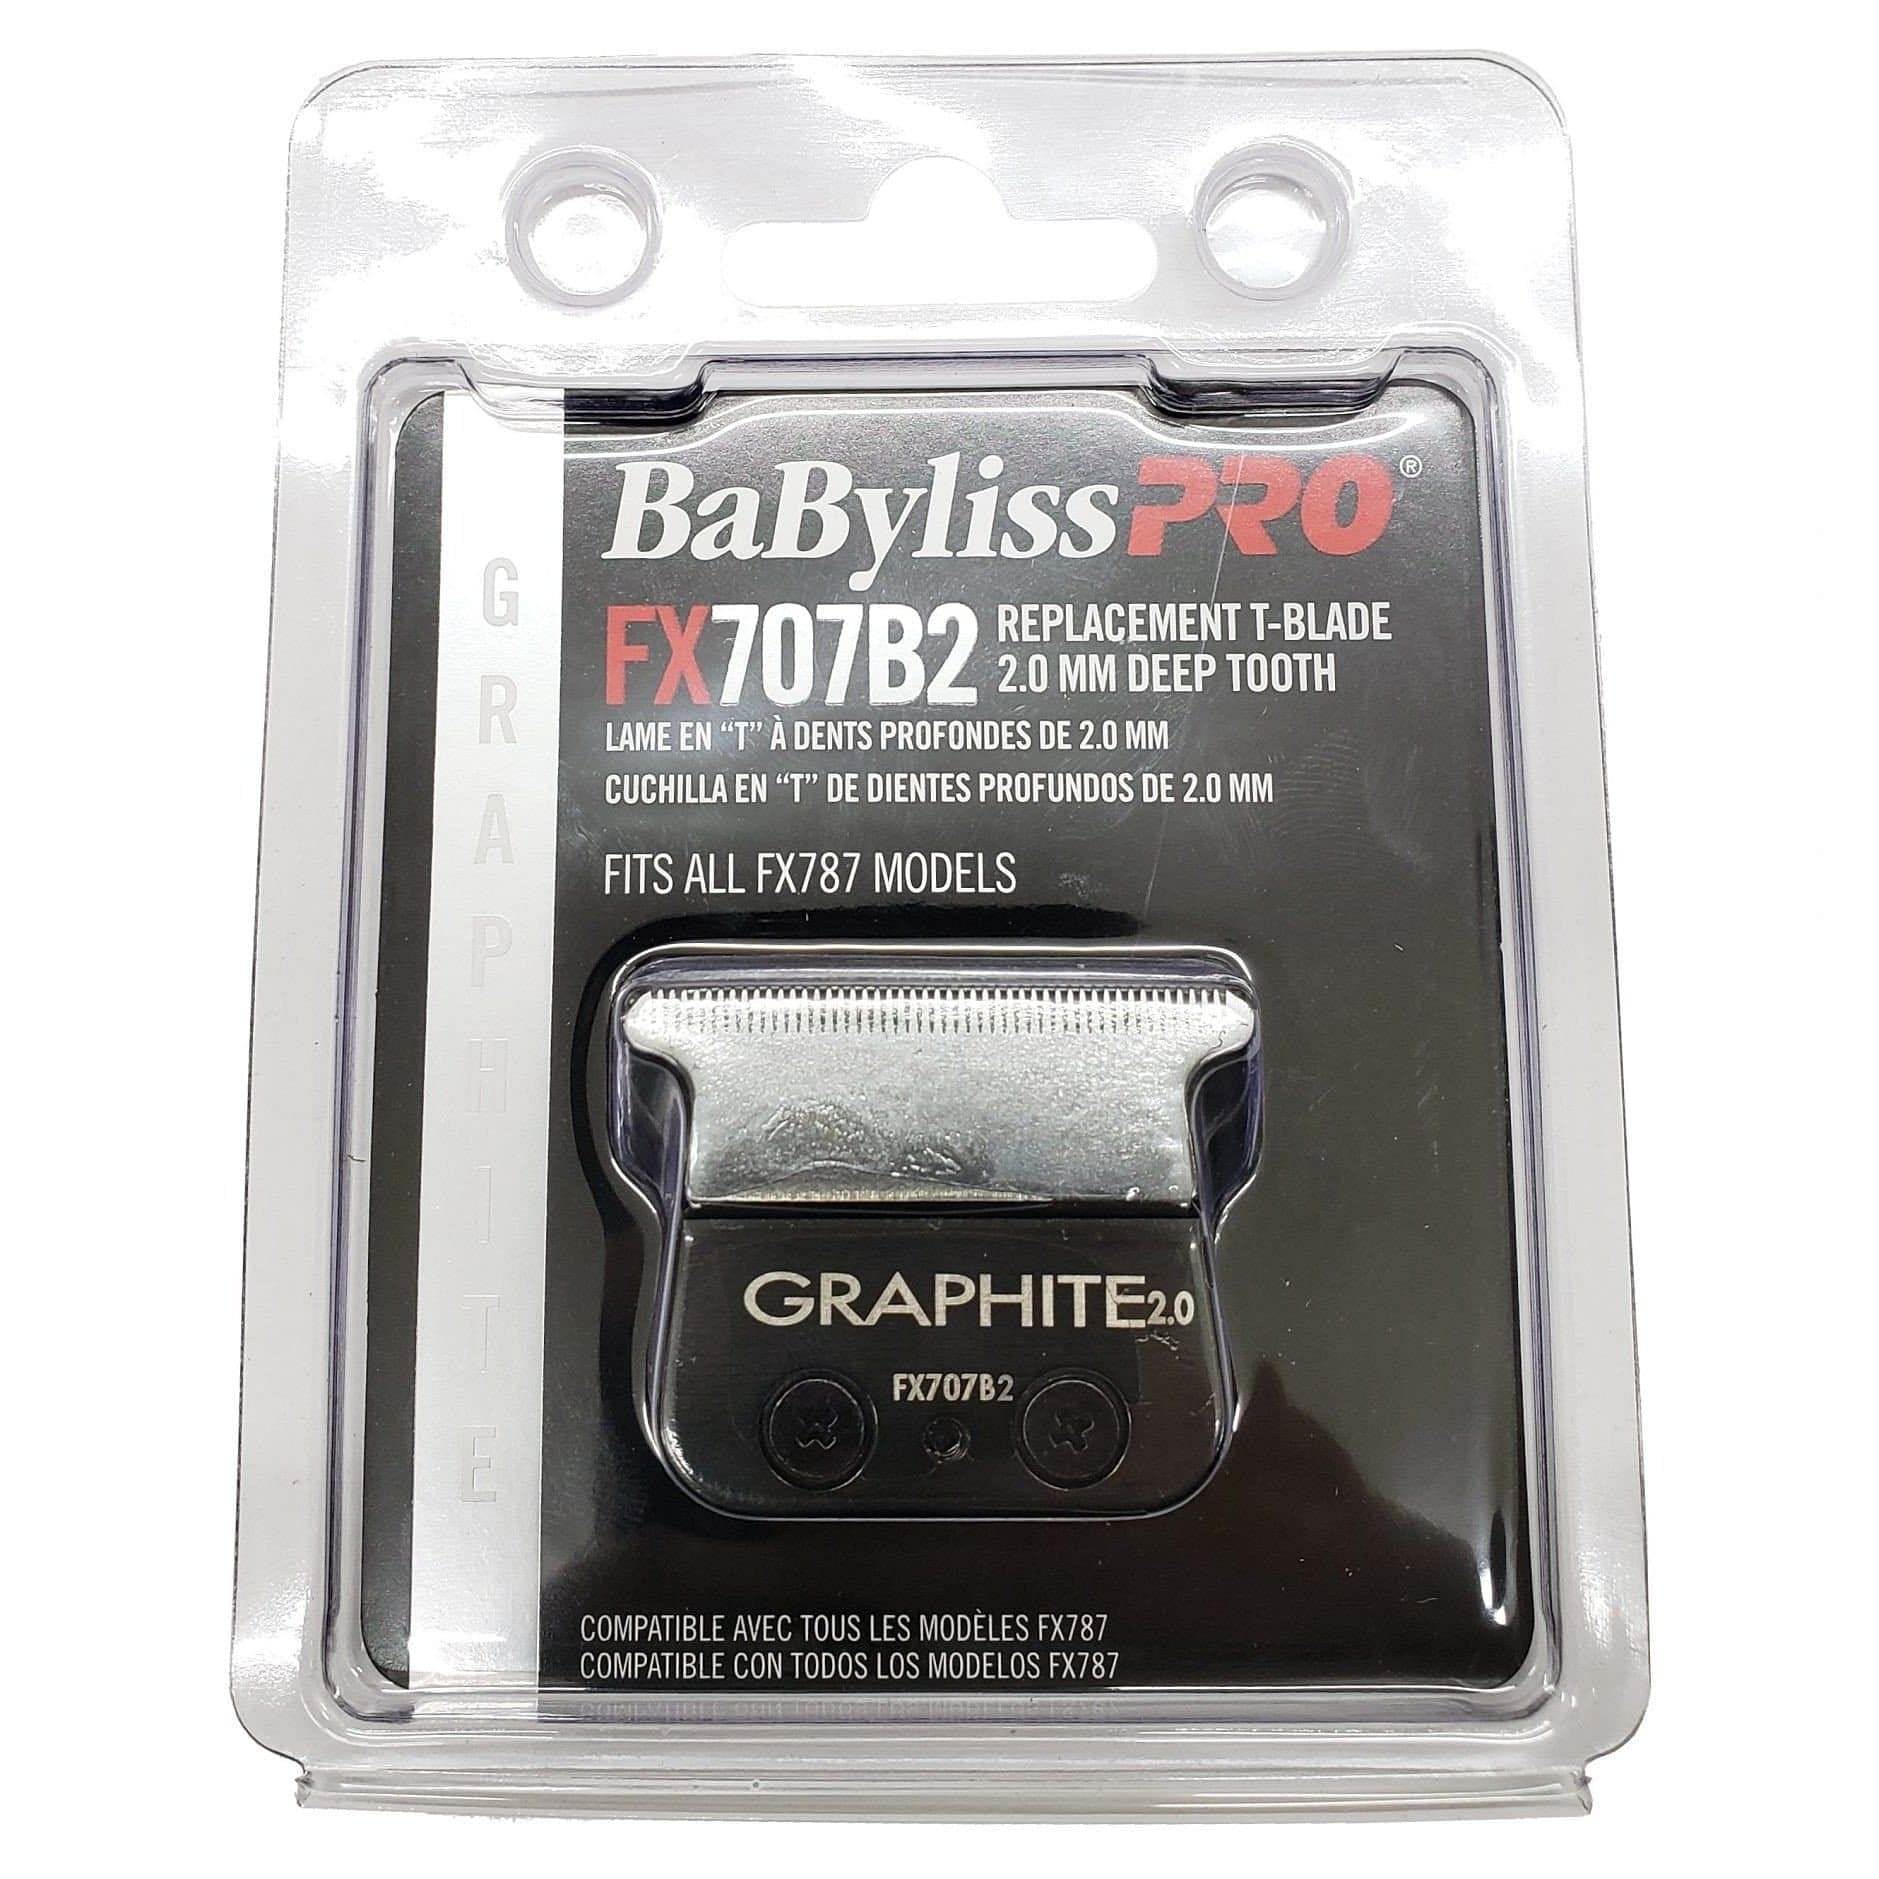 #FX707B2-BaByliss Pro Graphite Deep Tooth Replacement T-Blade Fits All FX787 Models - Goldy TV